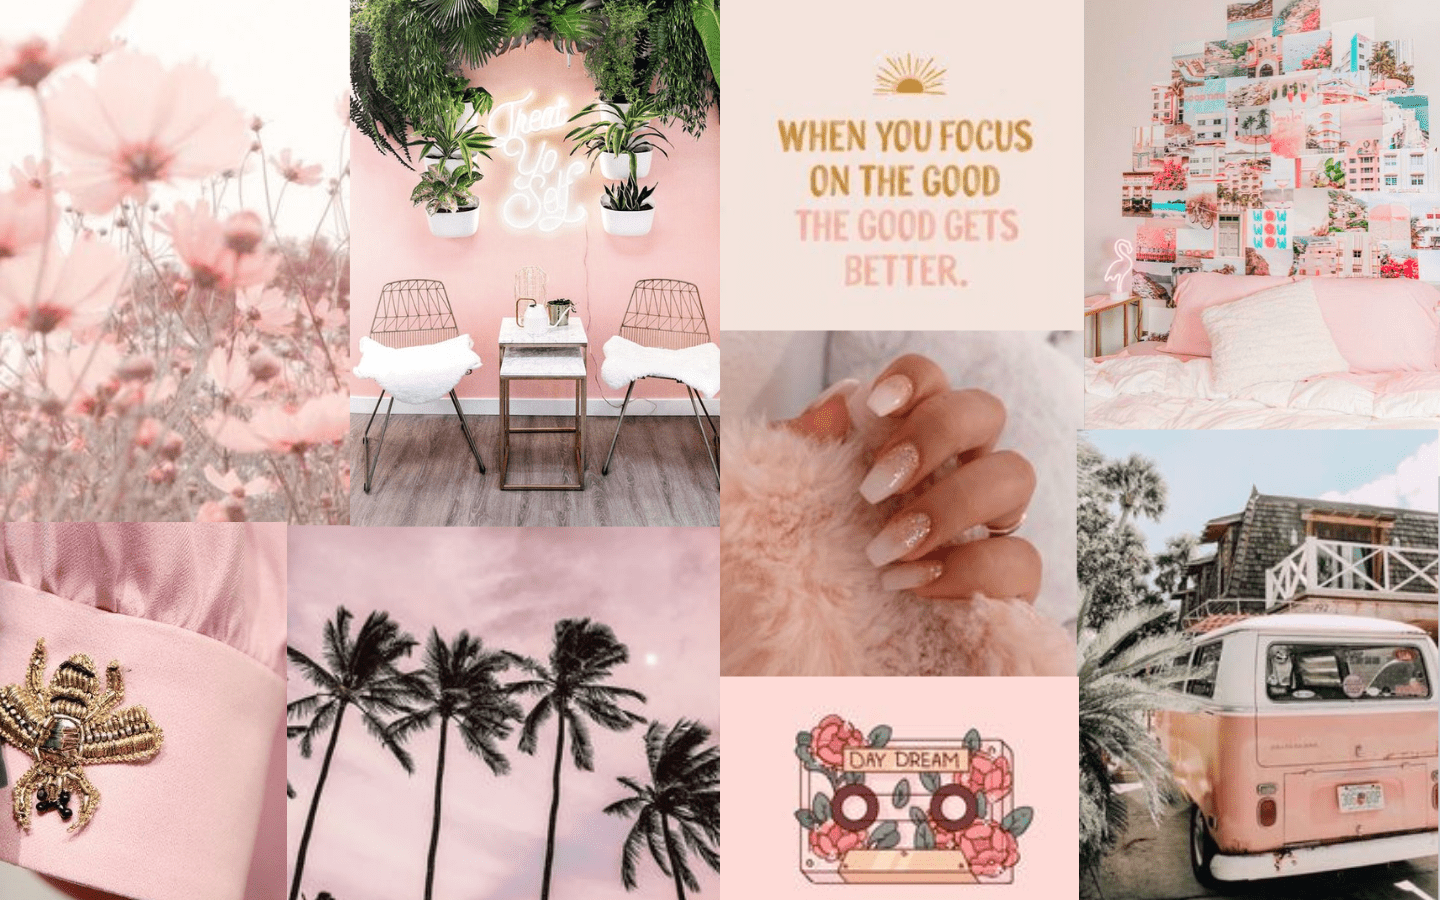 A collage of pink aesthetic images including palm trees, a VW van, and a quote that says 